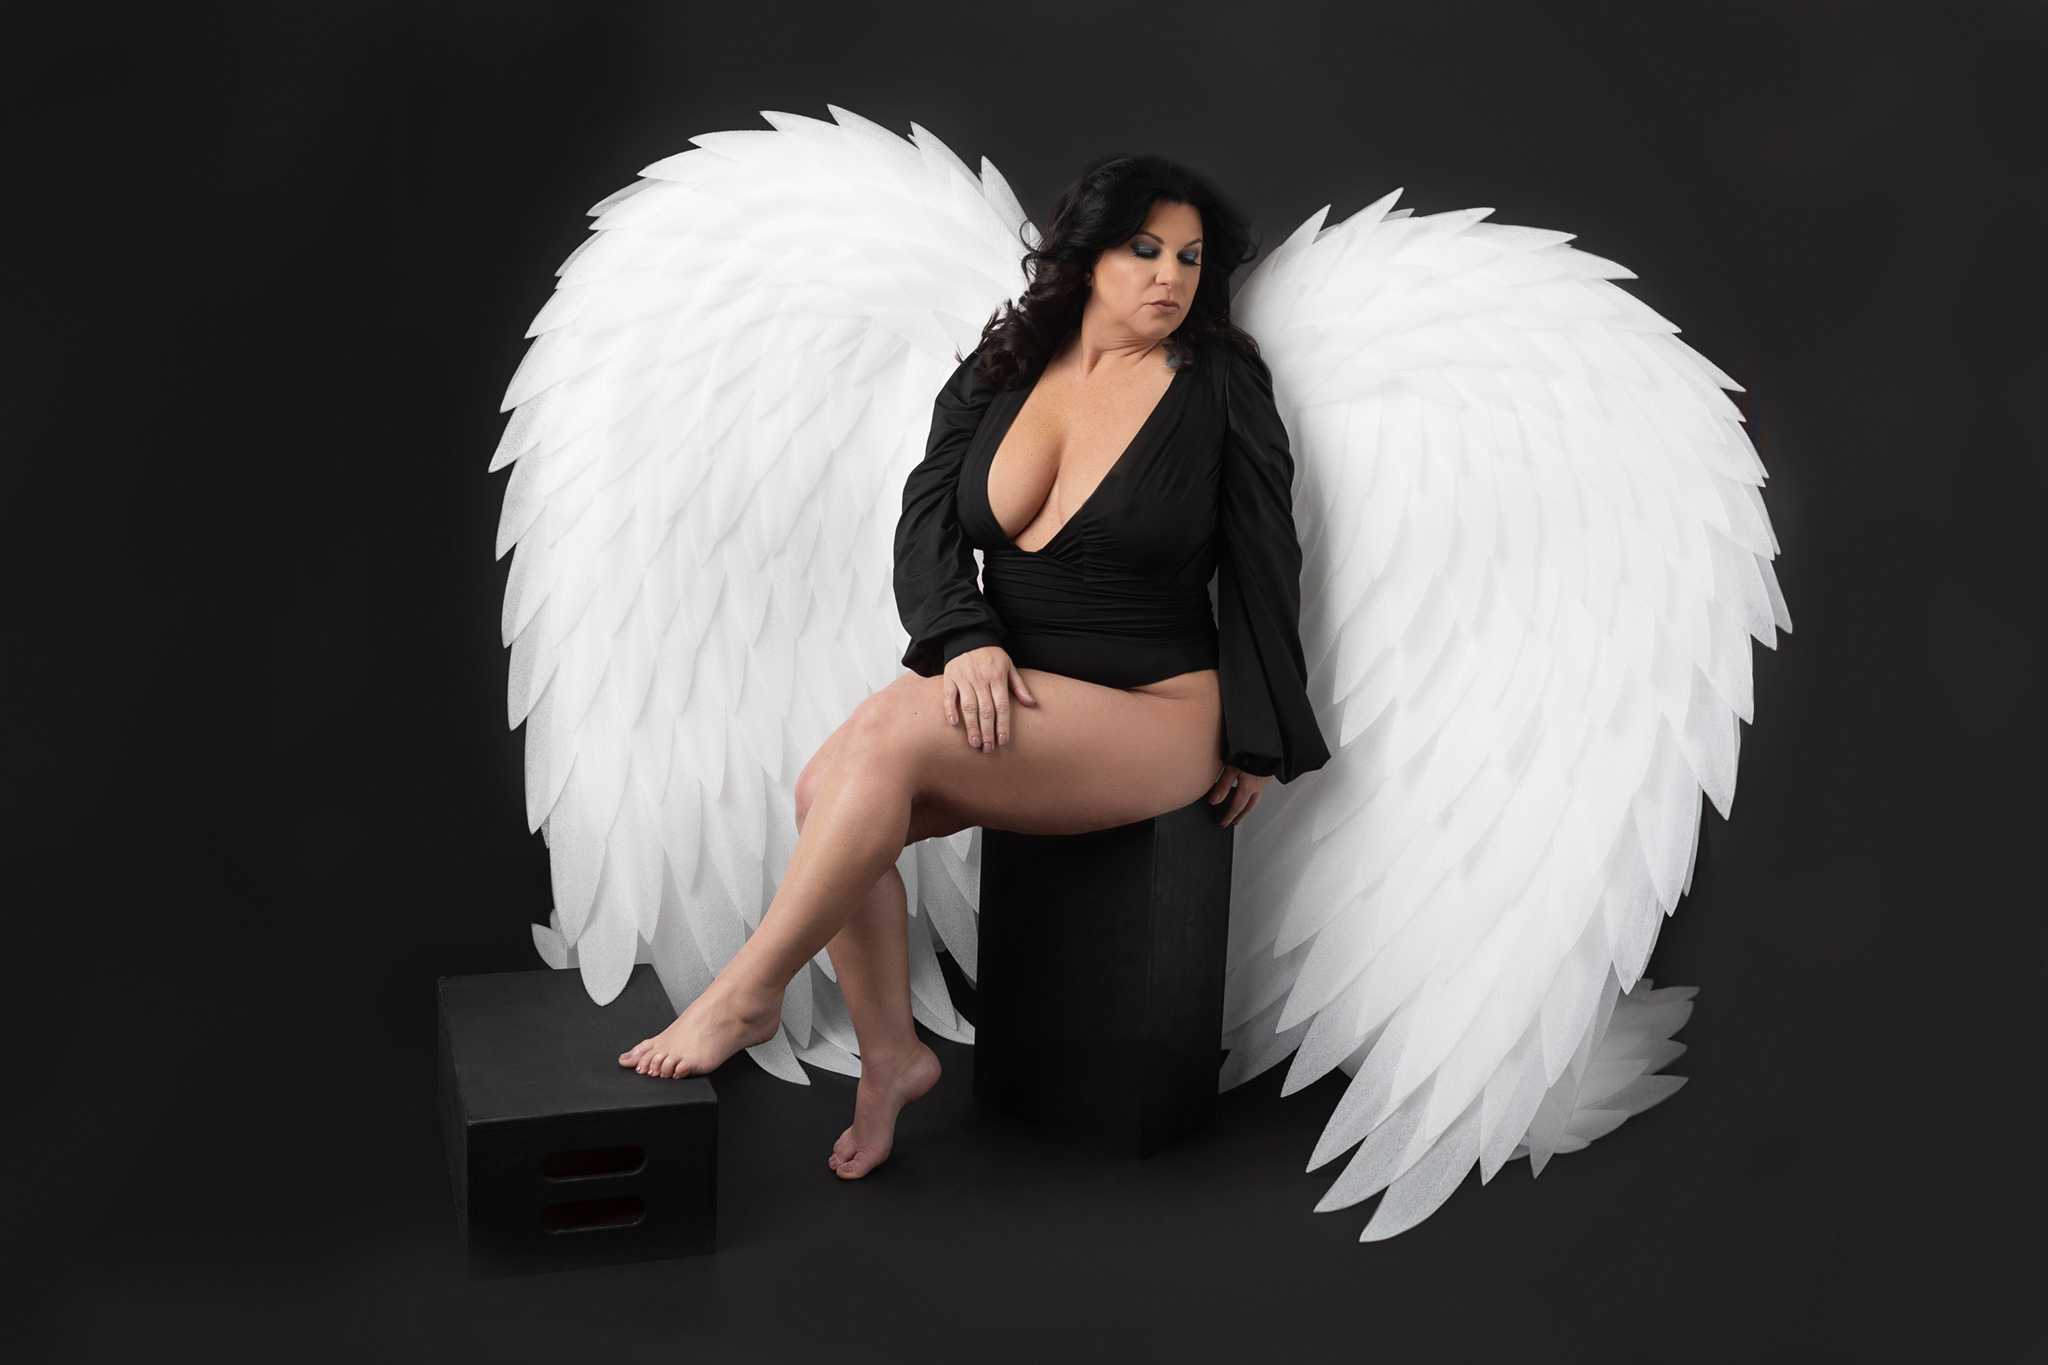 A woman in a black top sits on a box in a studio wearing large white angel wings after visiting waxing studio austin